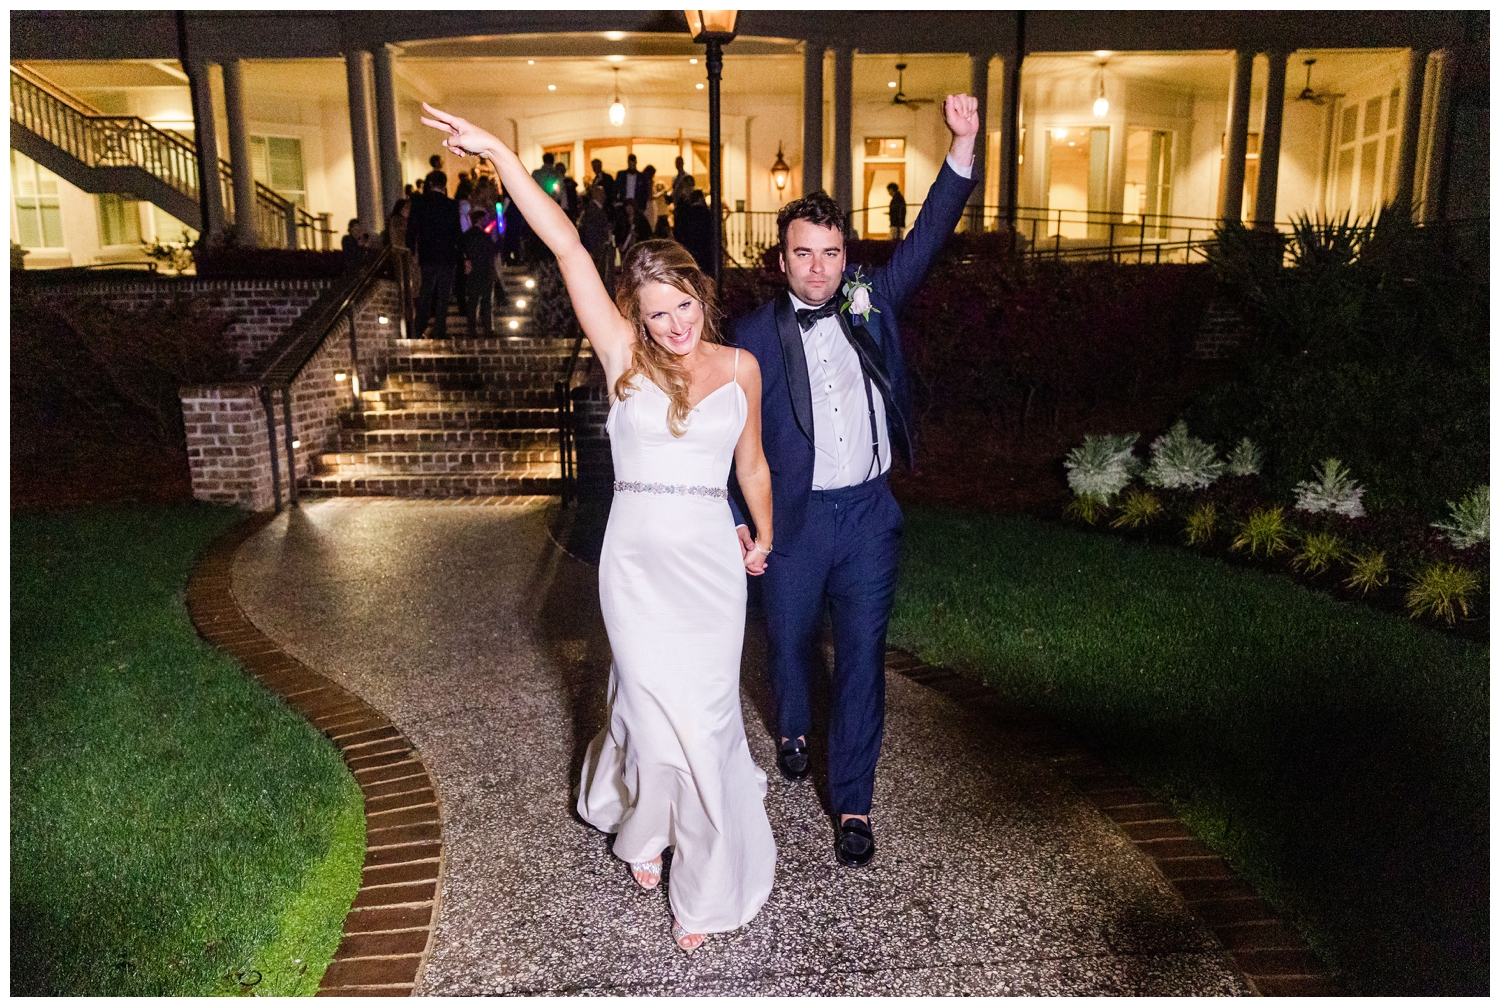 newlyweds celebrating as they exit wedding reception at Sea Pines Resort in Hilton Head